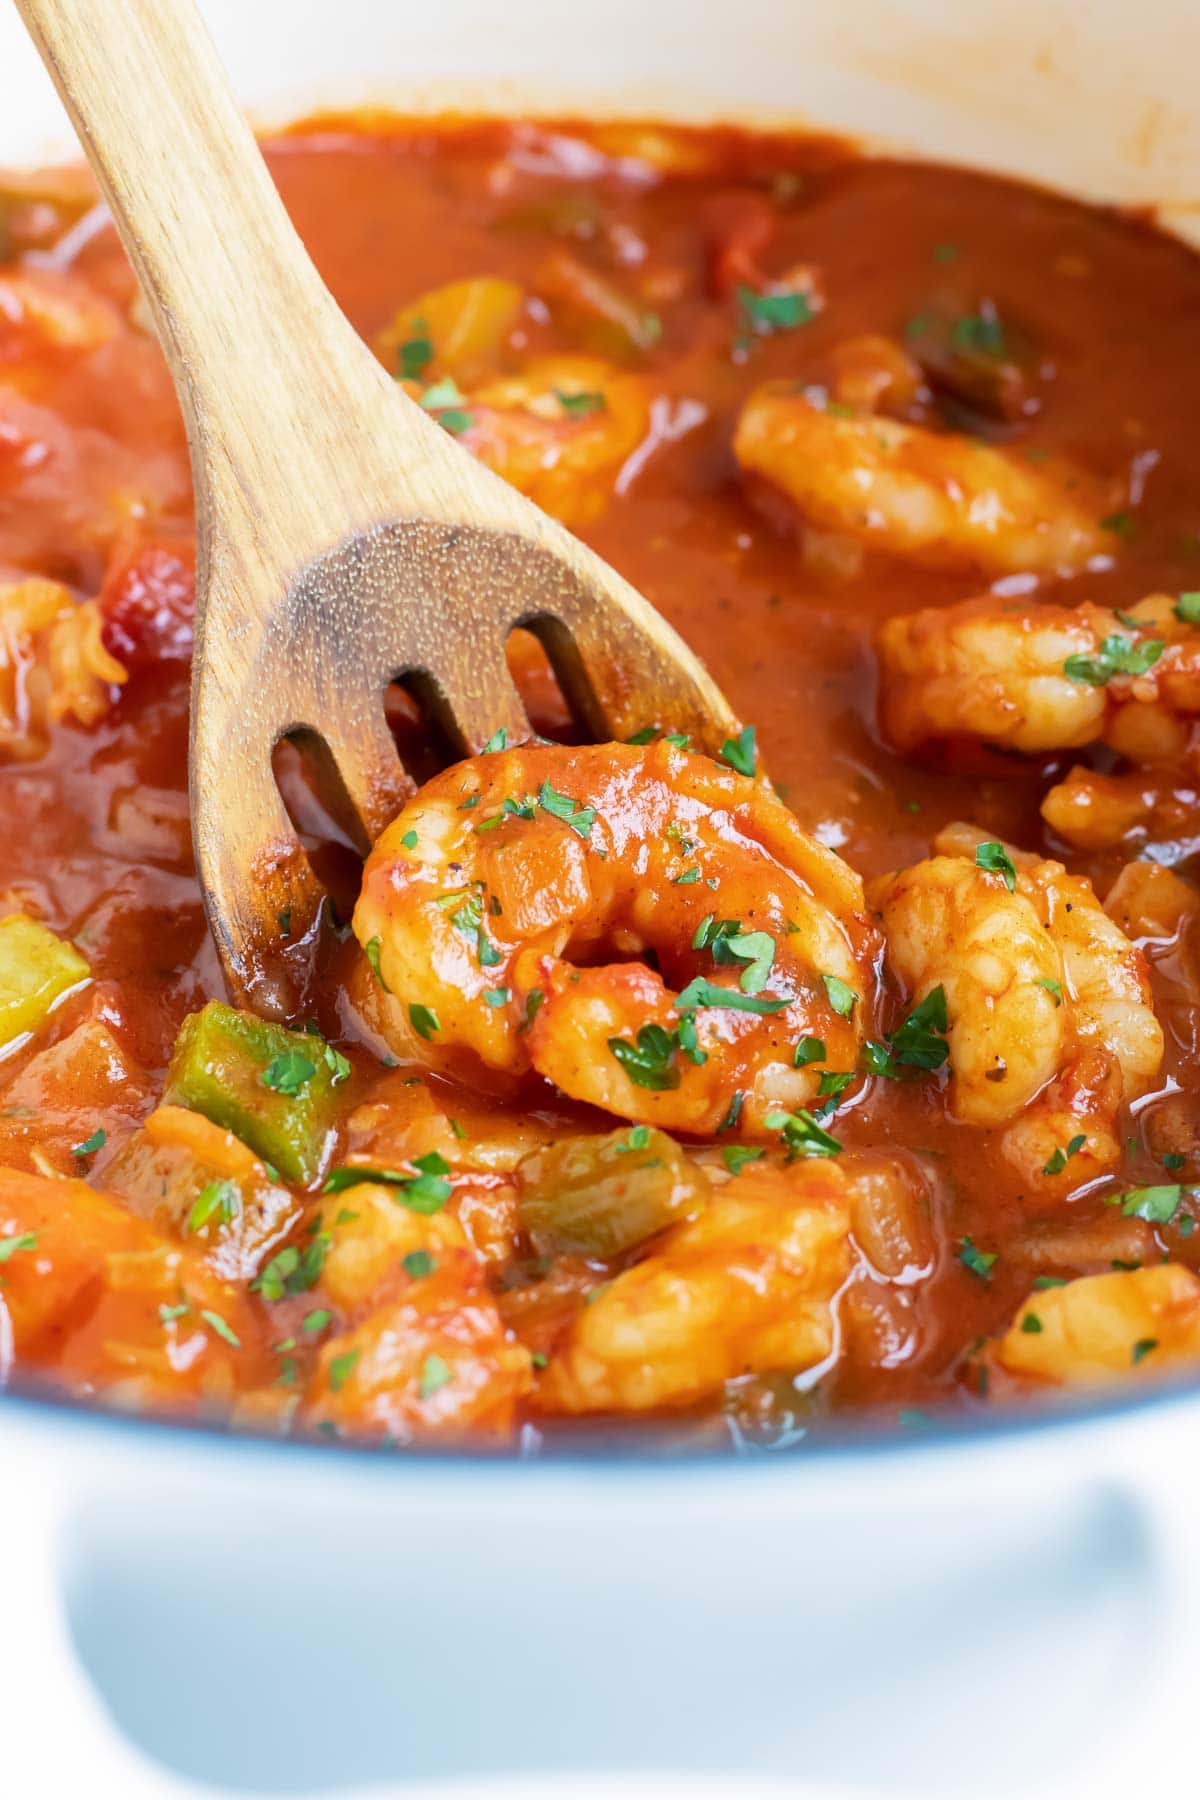 A wooden spoon scooping up a shrimp from a pot of Shrimp Creole.